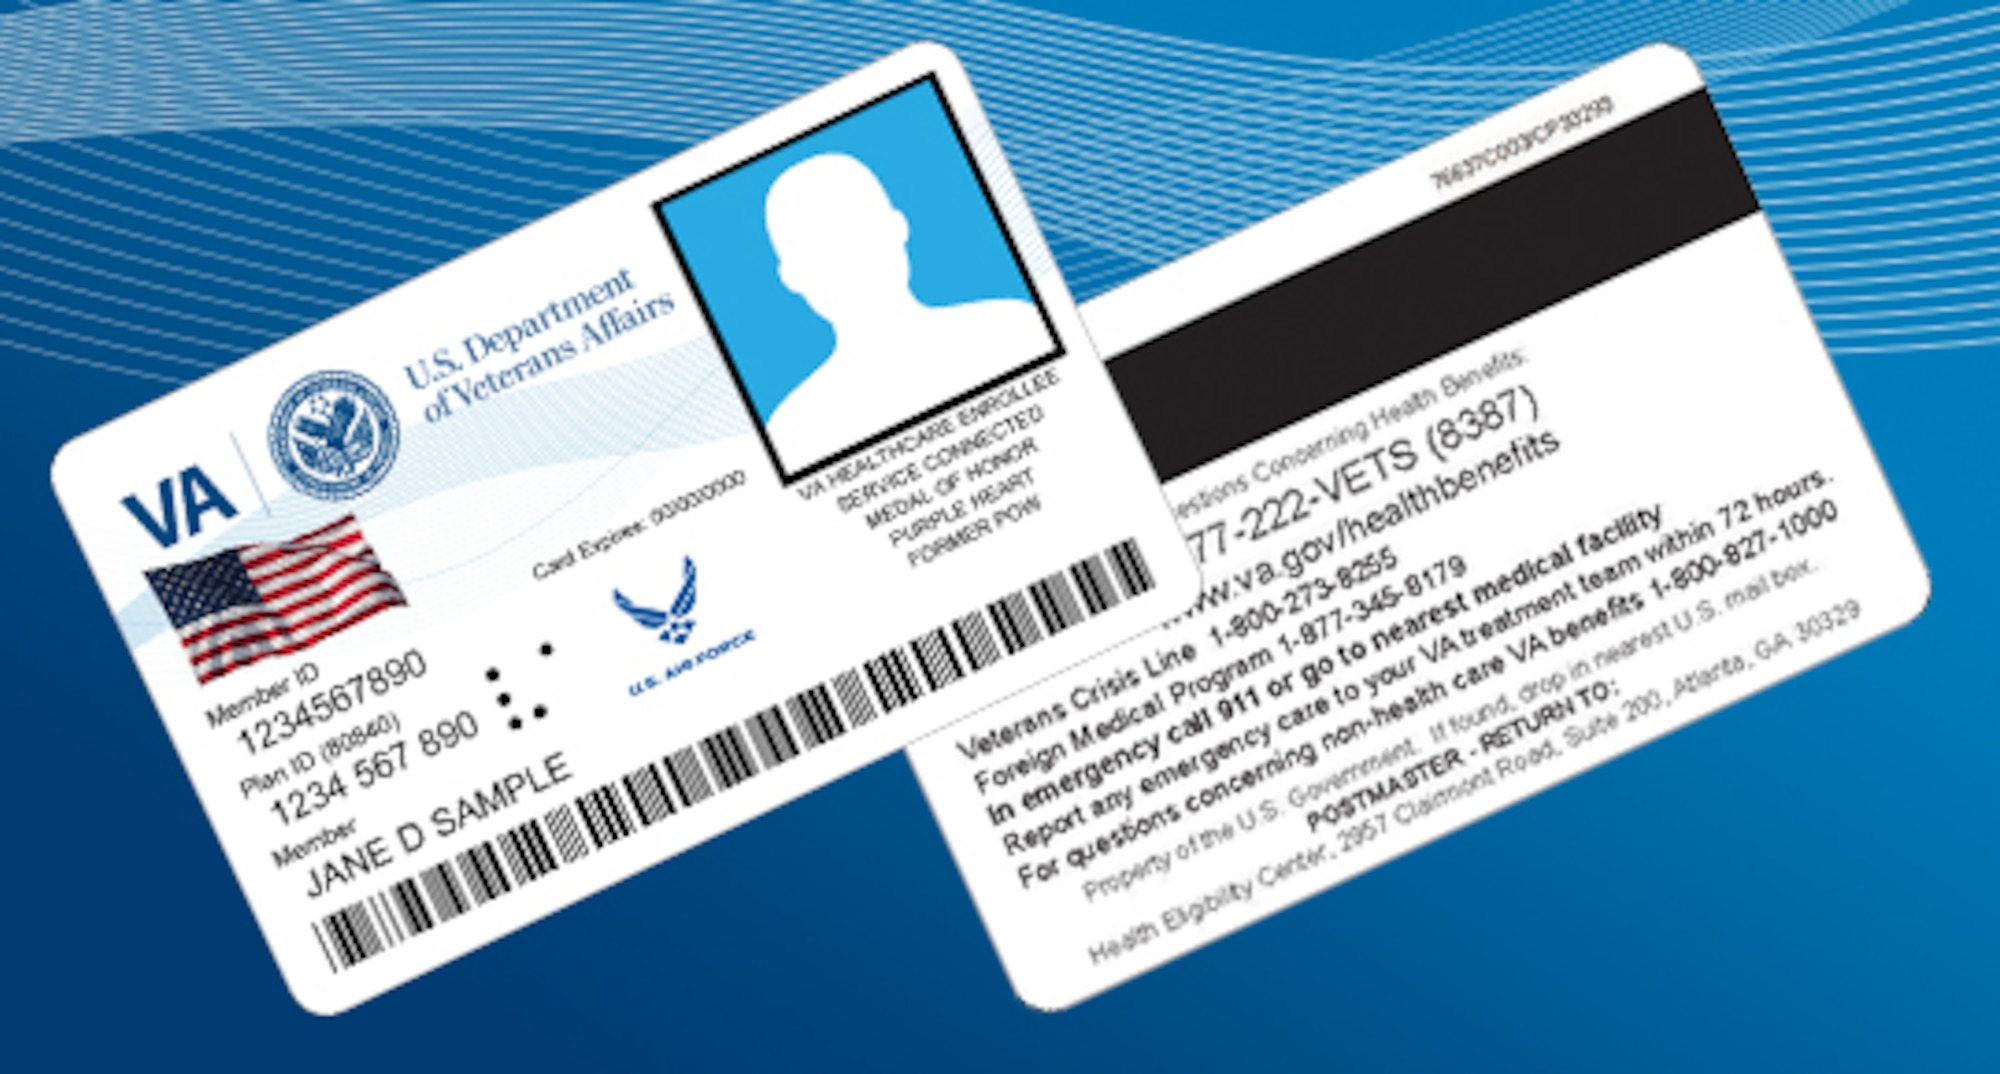 Starting on Jan. 1, 2020, veterans with service-connected disabilities and their primary caregivers will have shopping privileges at the MacDill Air Force Base Exchange, commissary and eligible base recreation facilities with a Department of Veterans Affairs issued Veteran Health Identification Card (VHIC). Veterans must be enrolled in the VA health care system to receive a VHIC. To enroll, you can complete an application for enrollment in VA health care by telephone without the need for a signed paper application. Just call 1-877-222-VETS (8387) Monday through Friday from 8 a.m. until 8 p.m. Eastern. You can also apply for VA healthcare benefits online at www.va.gov/healthbenefits/enroll, or in person at your local VA medical facility. Once your enrollment is verified, you can have your picture taken at your local VA medical center, and a VHIC will be mailed to you. (Graphic by Department of Veterans Affairs)